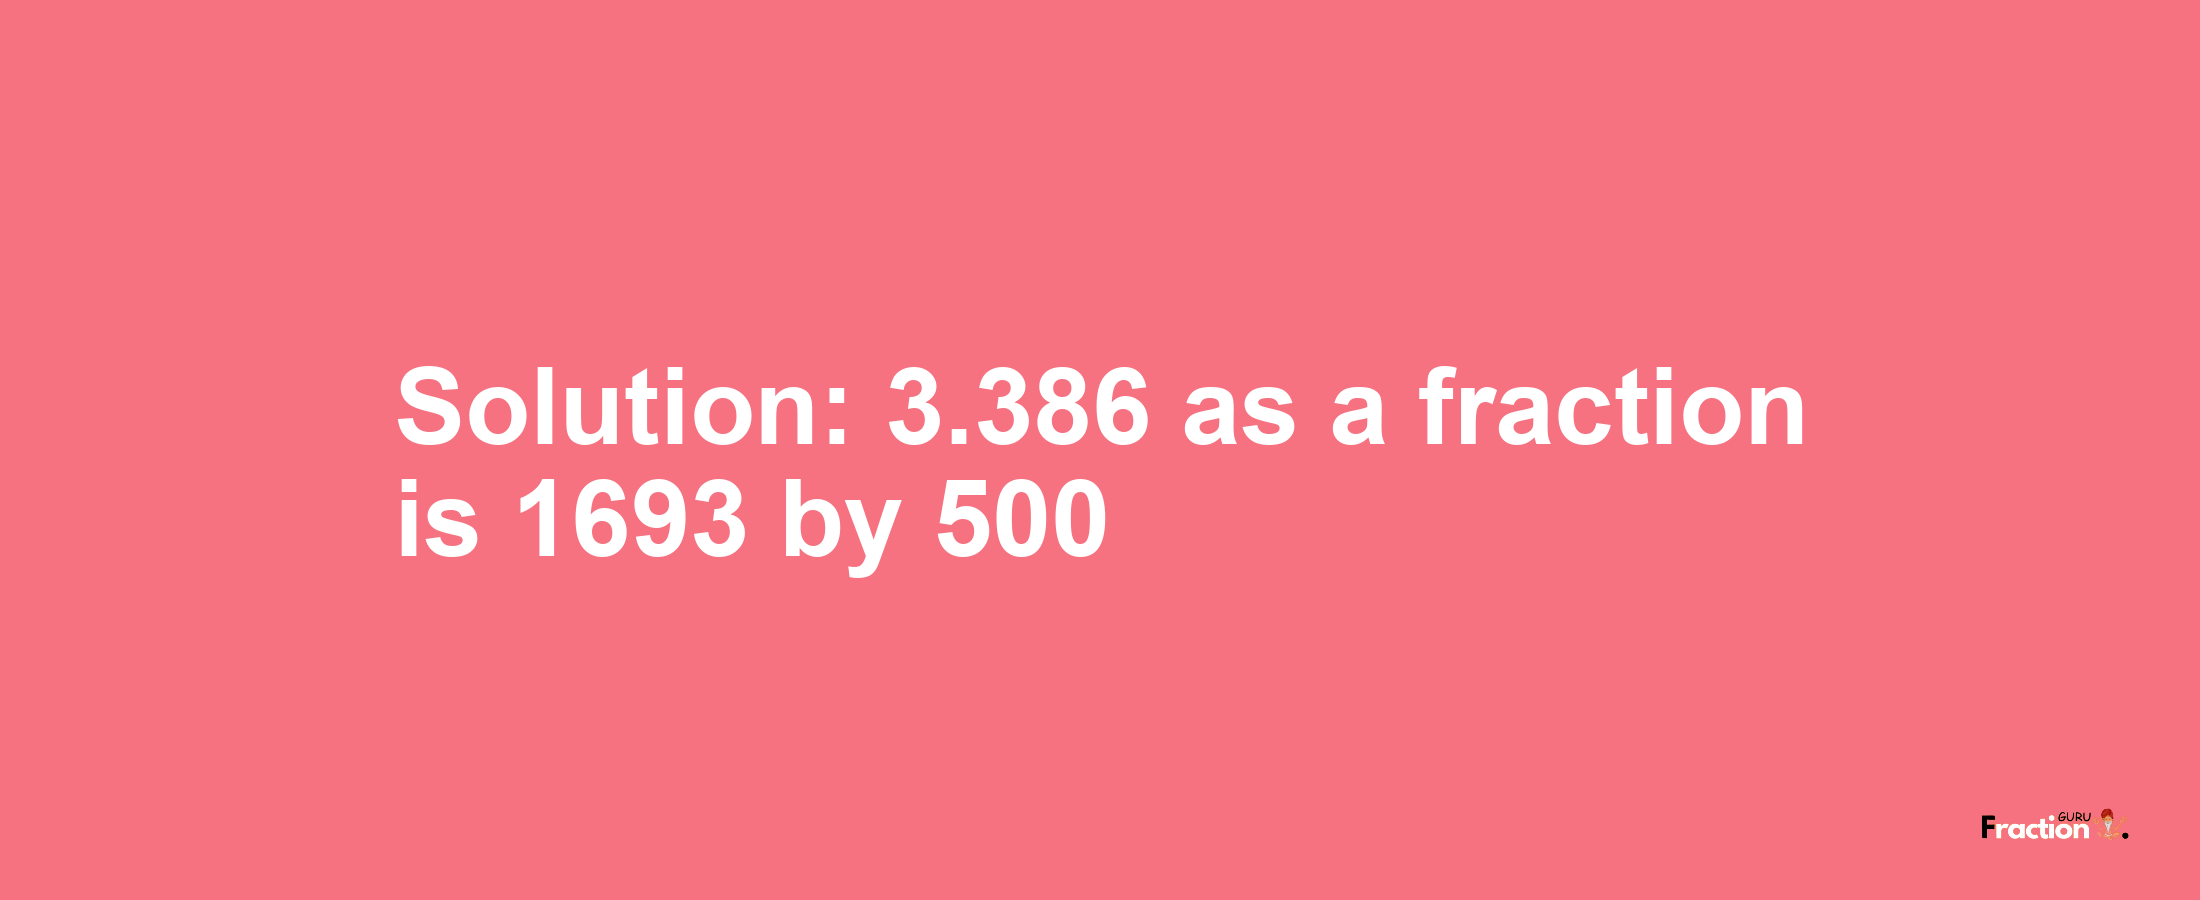 Solution:3.386 as a fraction is 1693/500